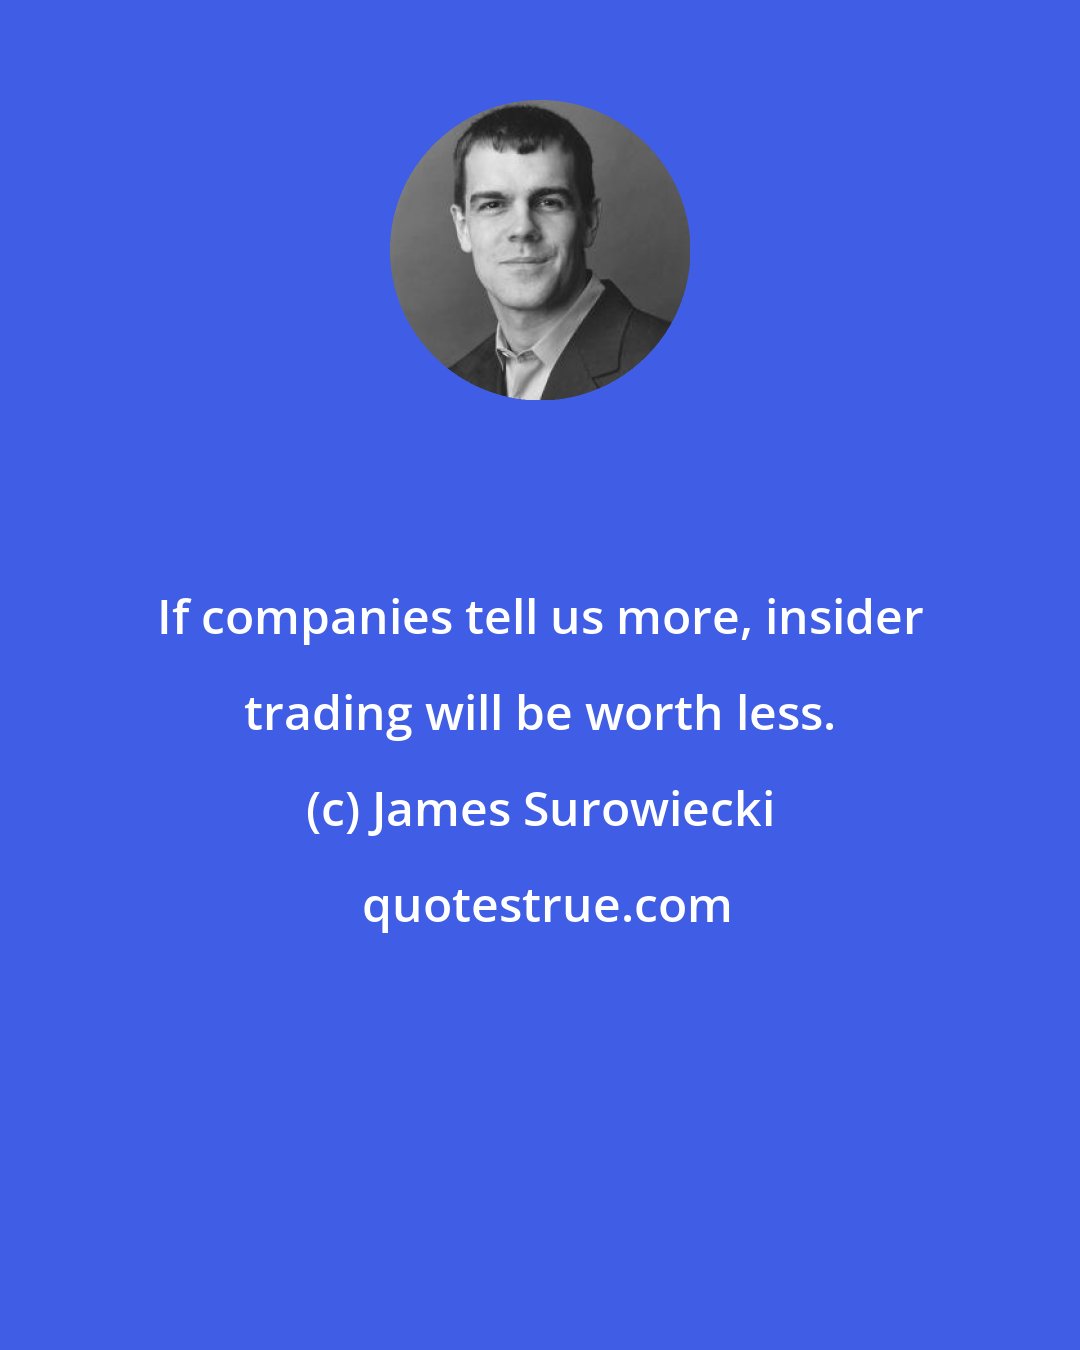 James Surowiecki: If companies tell us more, insider trading will be worth less.